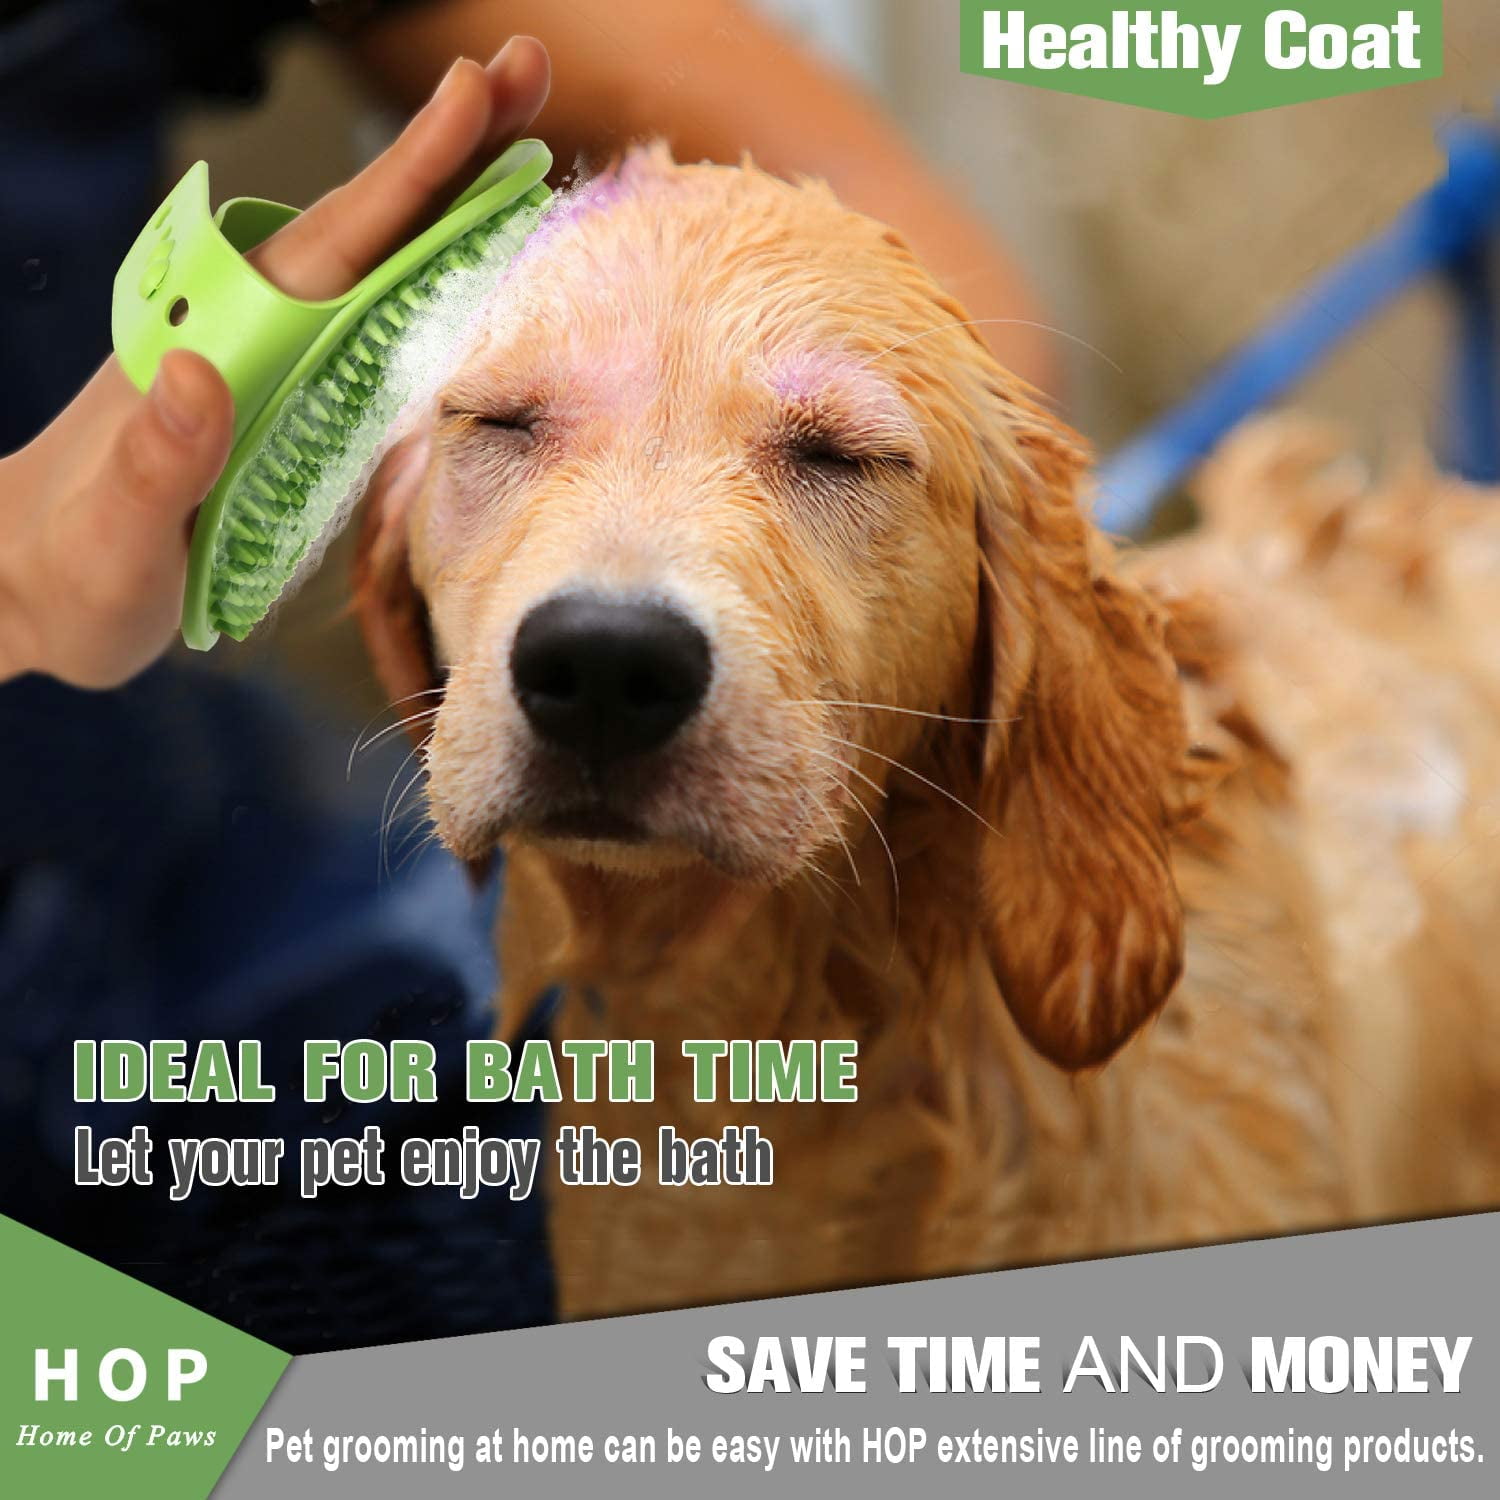 Golden-Haired Baths Time